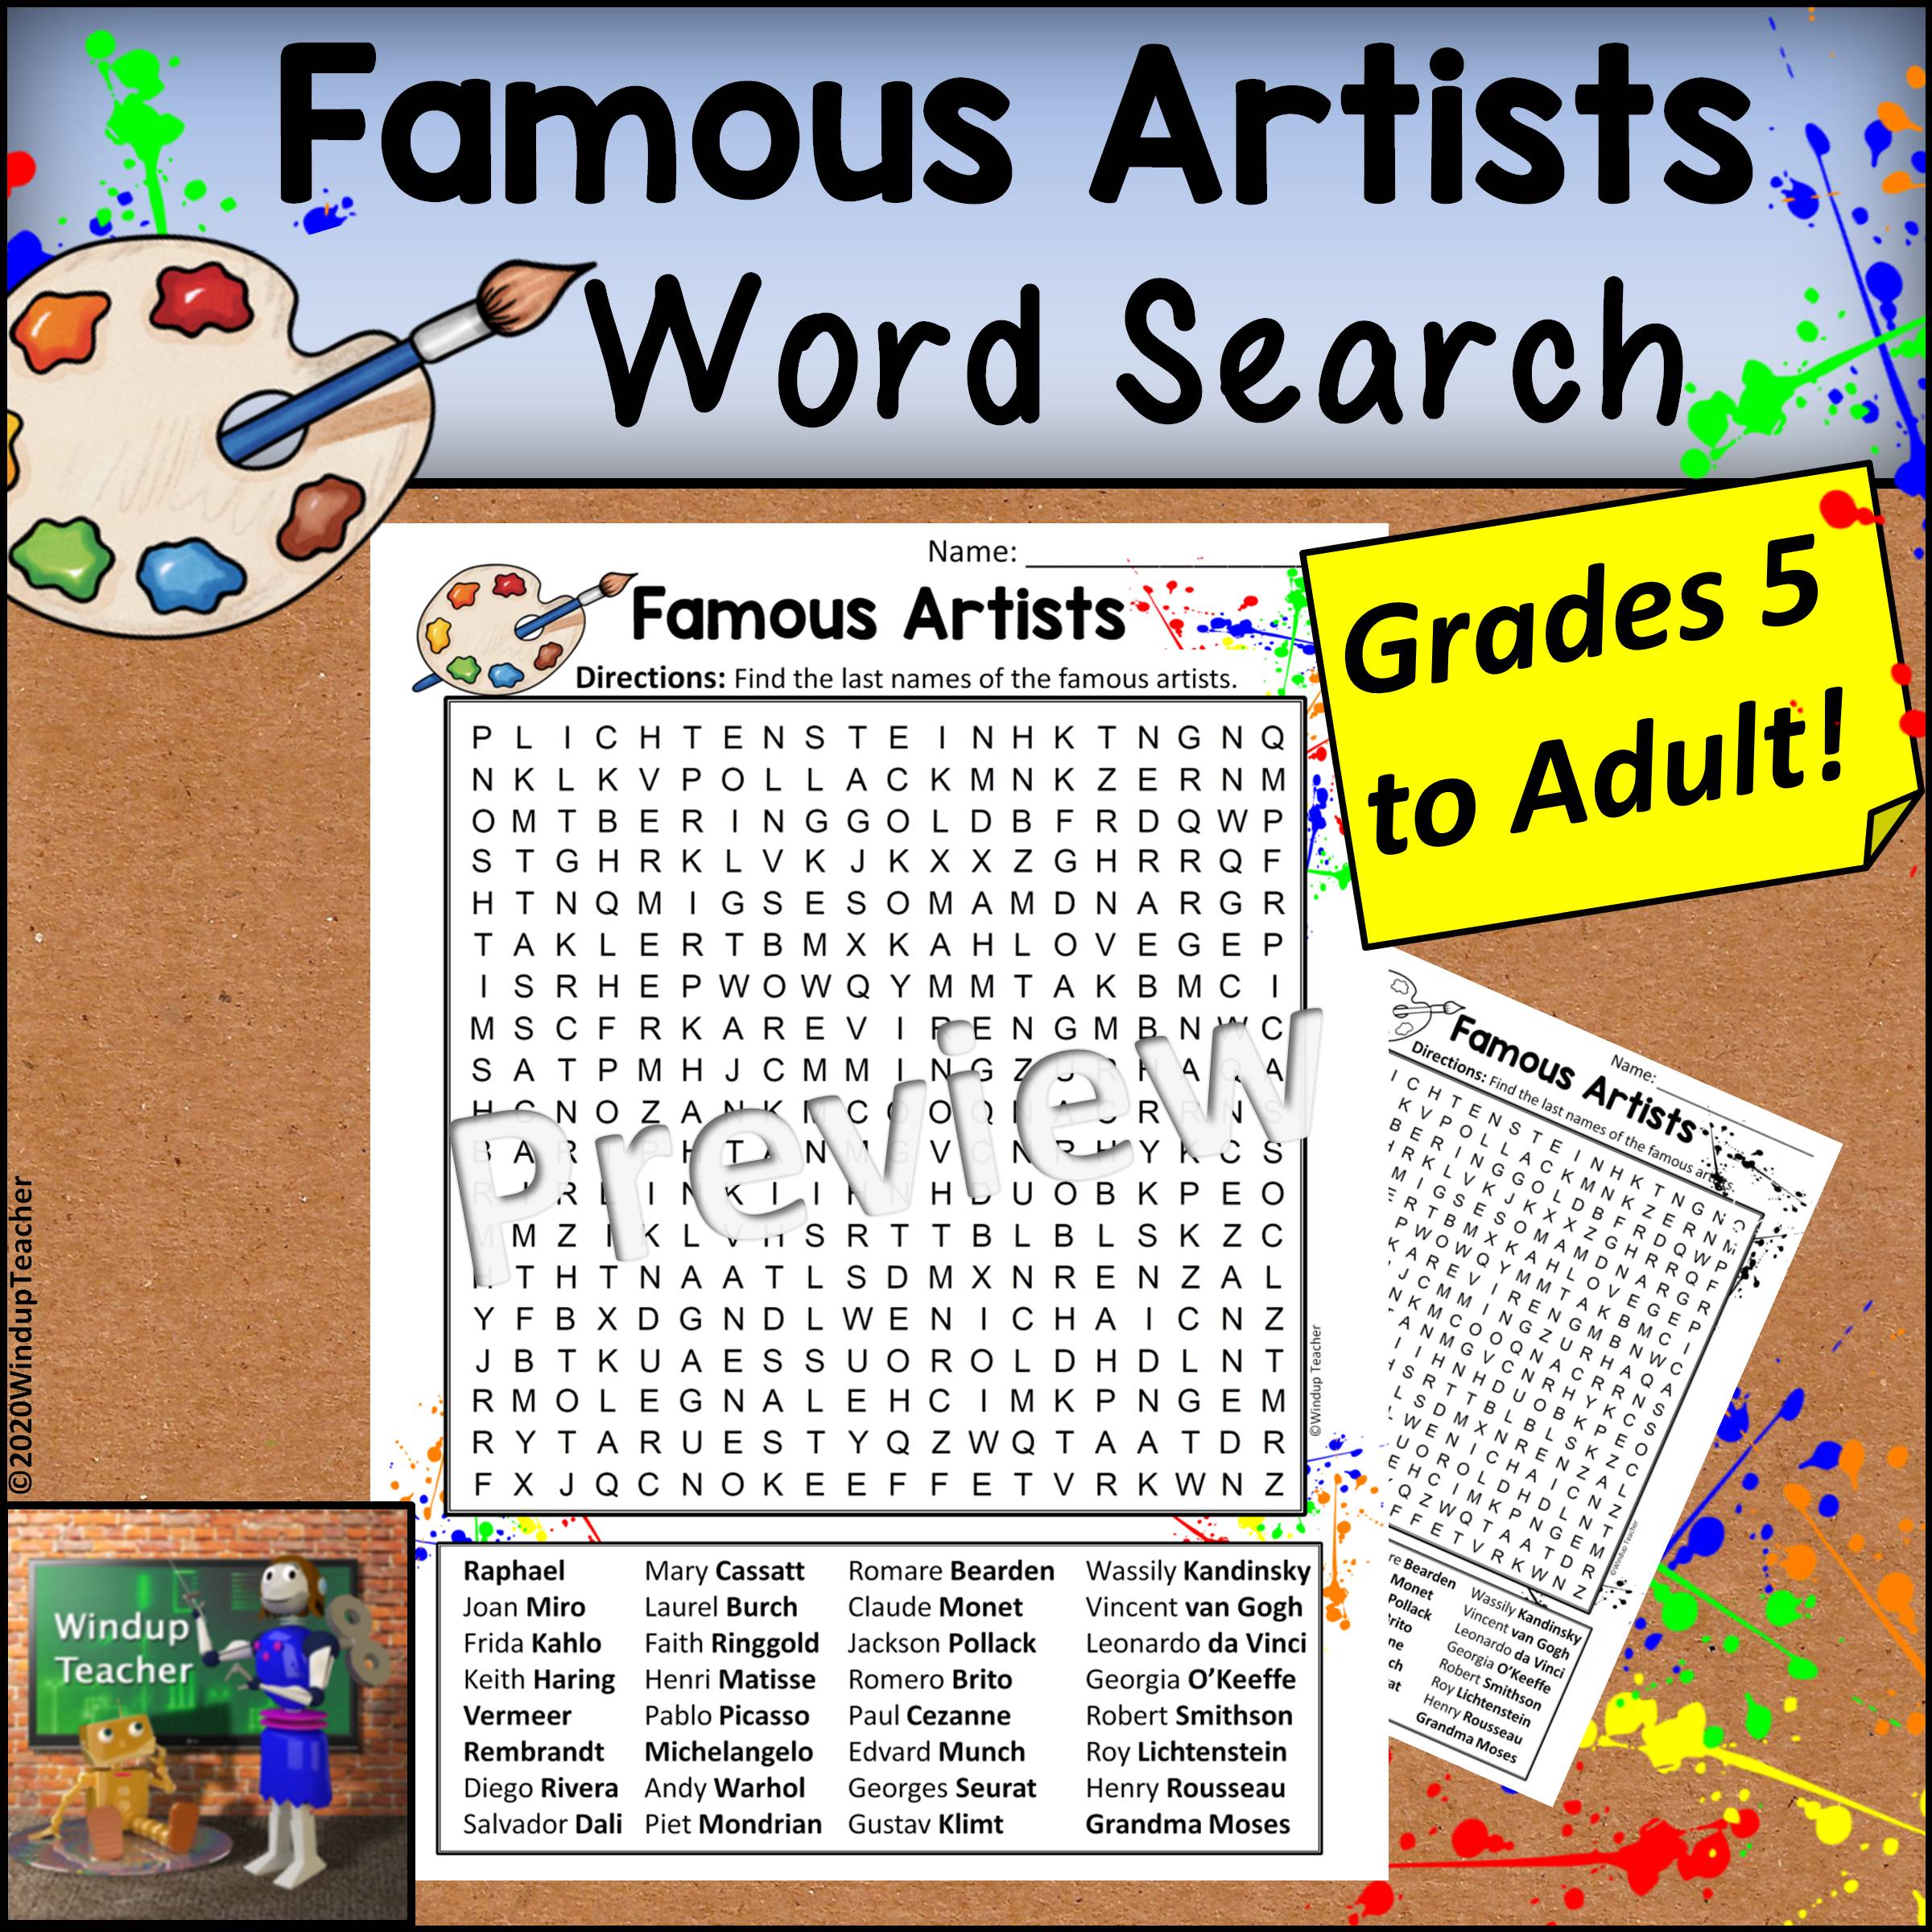 Famous Artists Word Search HARD for Grades 5 to Adult